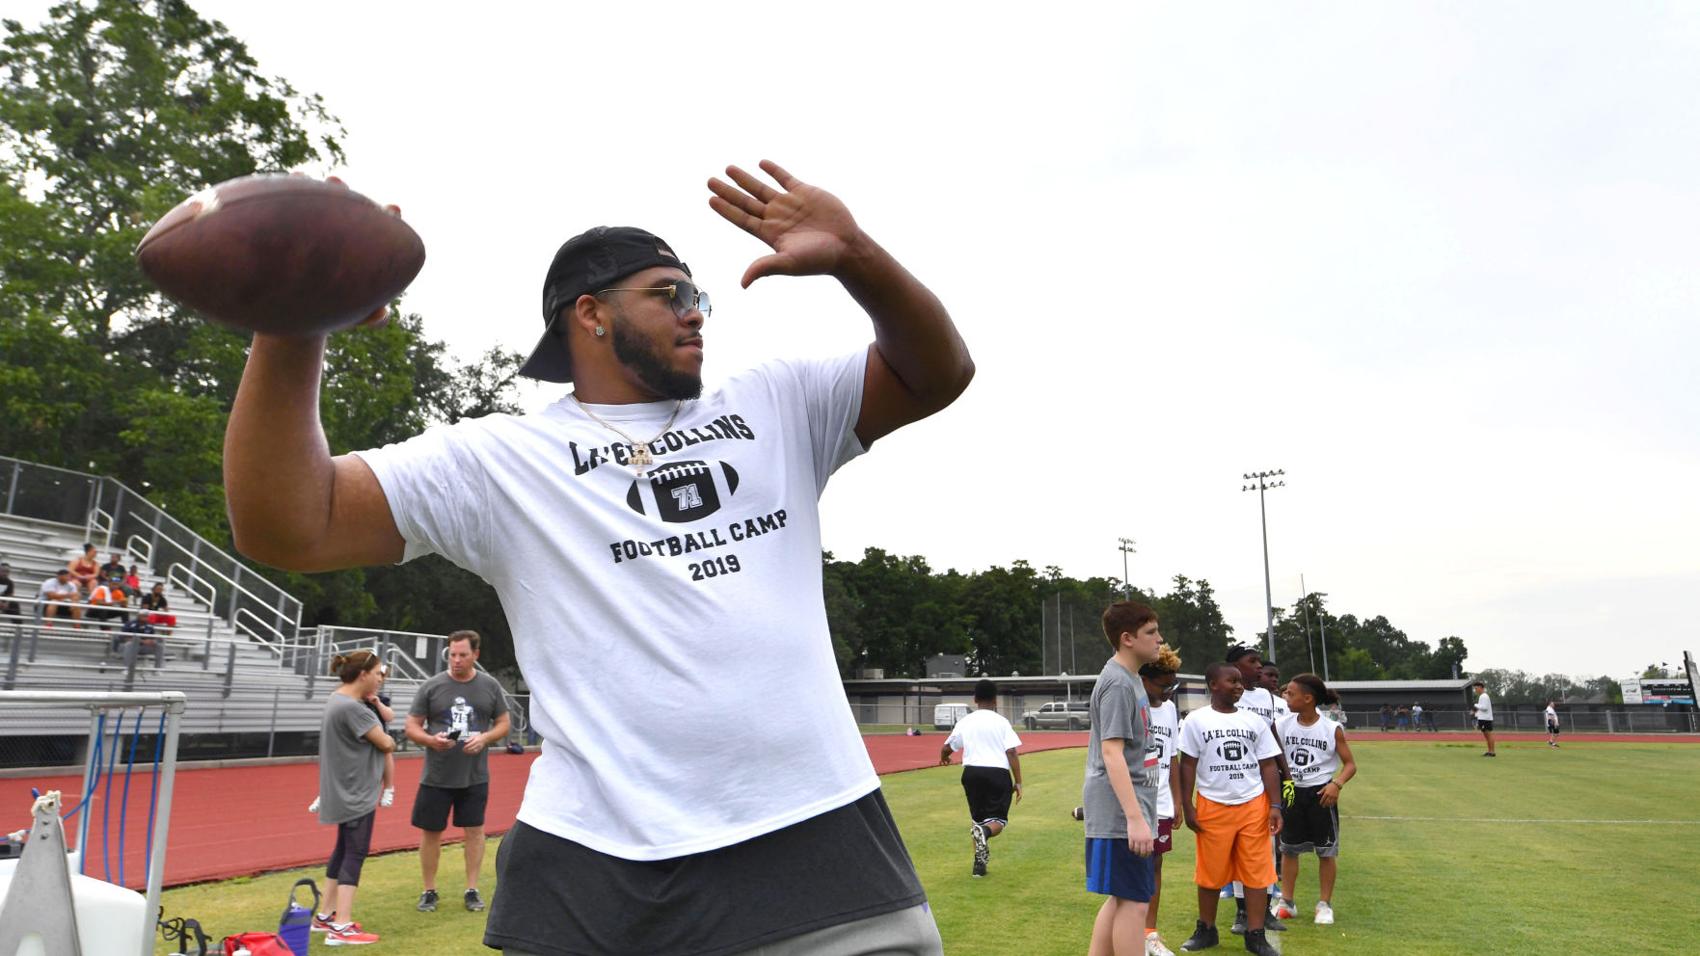 Photos: Former LSU offensive lineman La'el Collins, Dutchtown High combine forces for youth football camp